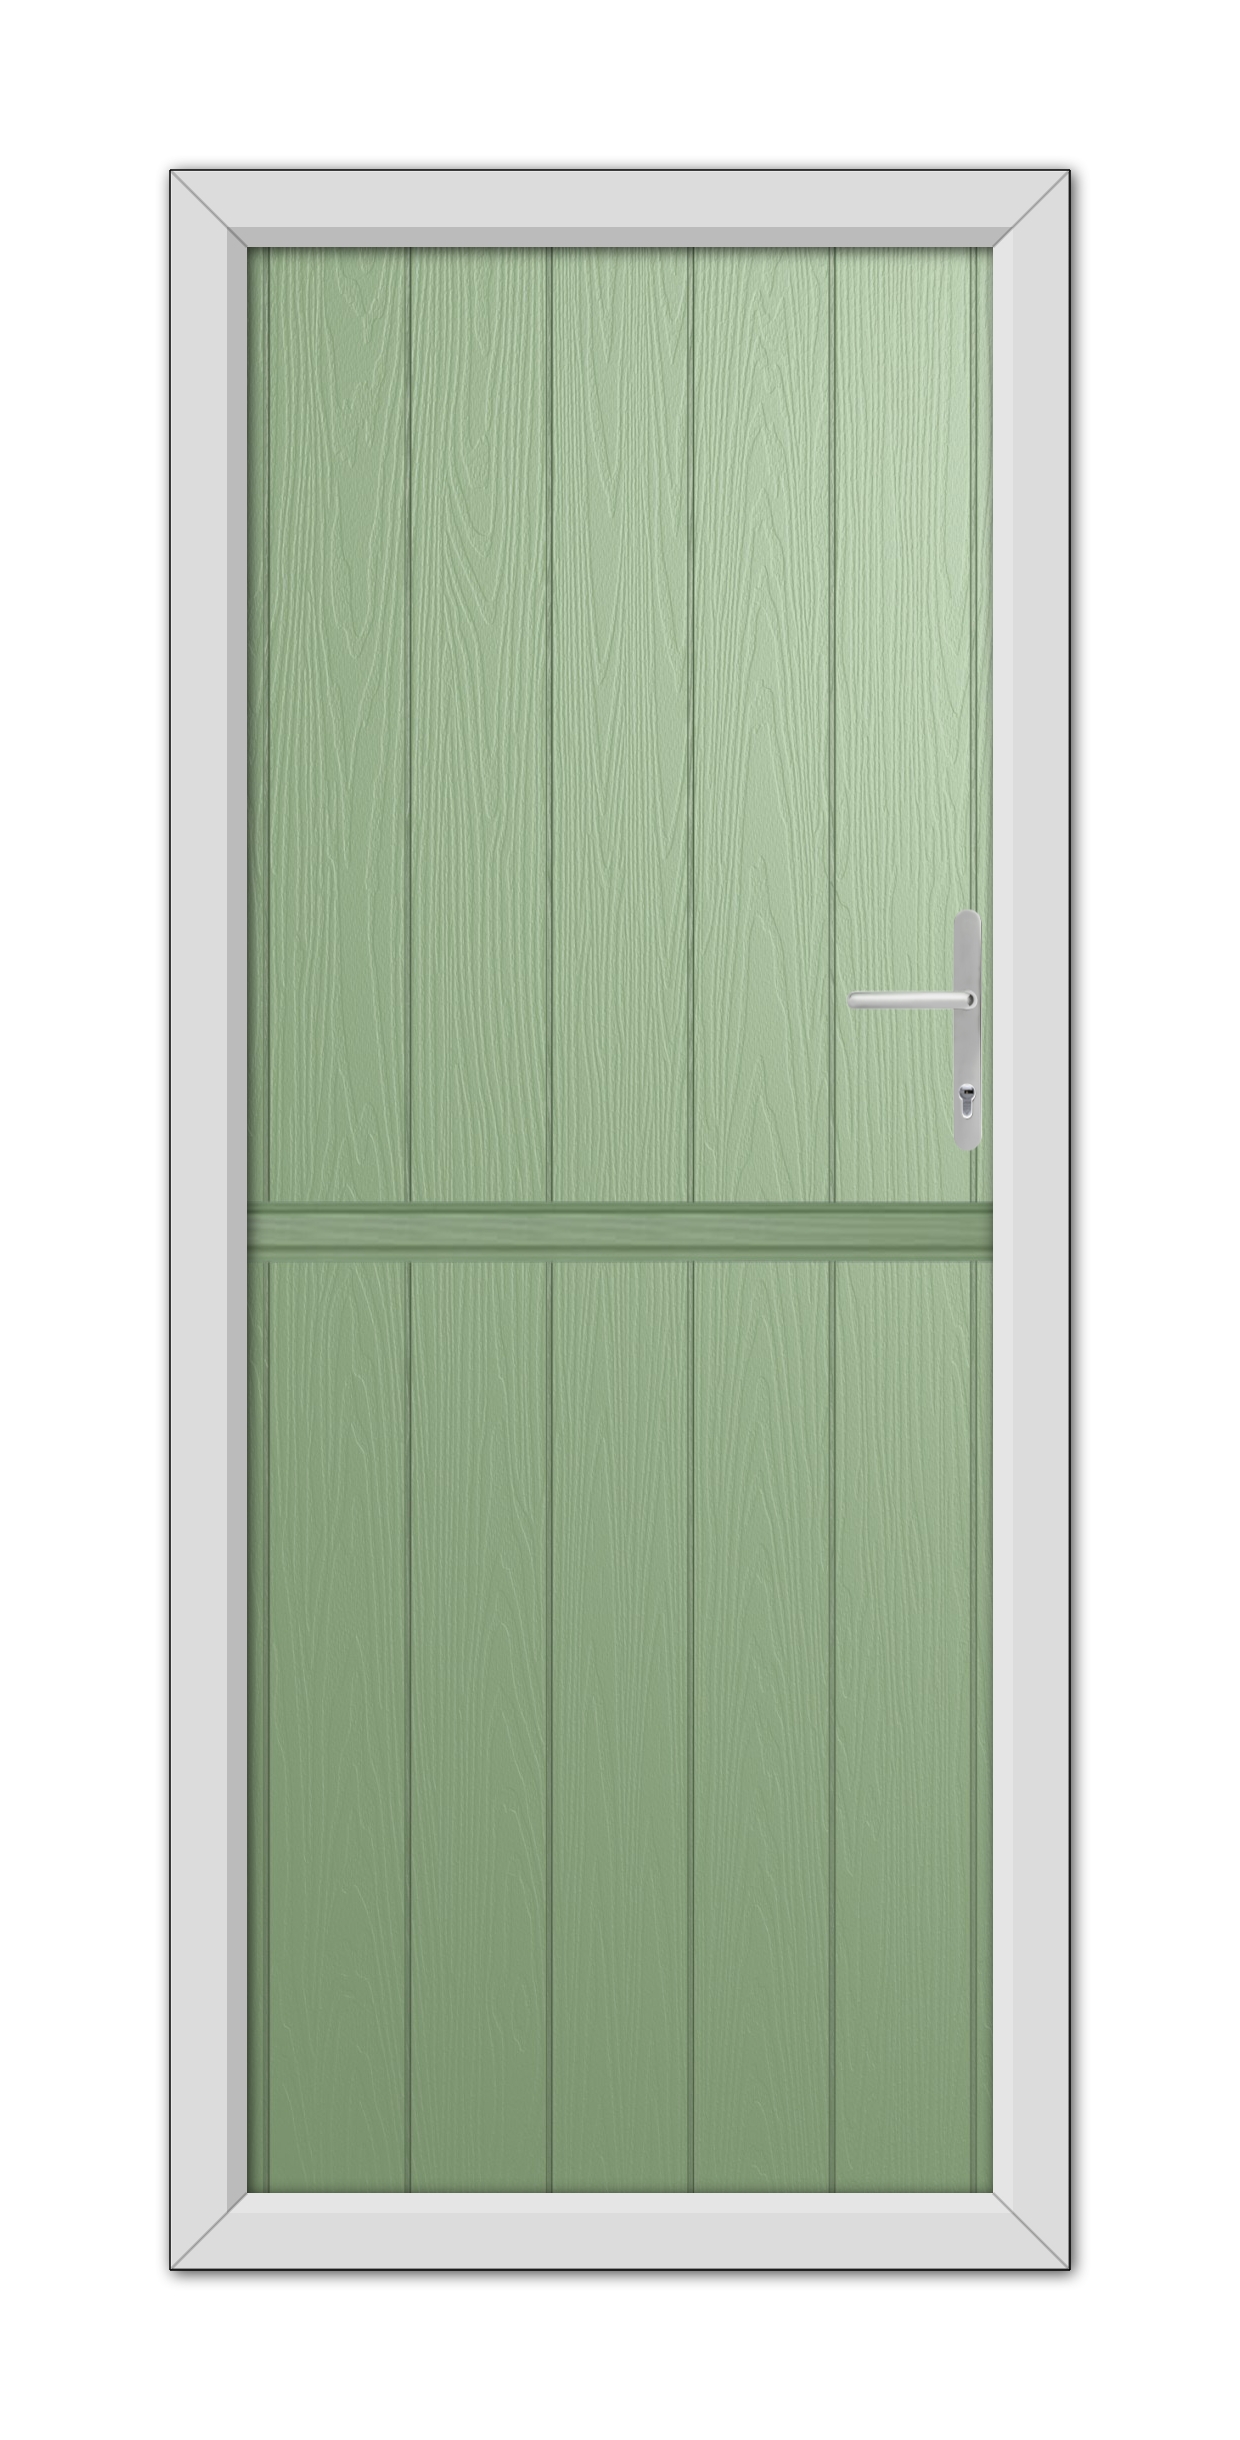 A Chartwell Green Norfolk Solid Stable Composite Door 48mm Timber Core with a simple handle, surrounded by a white frame, designed to look like wood planks.